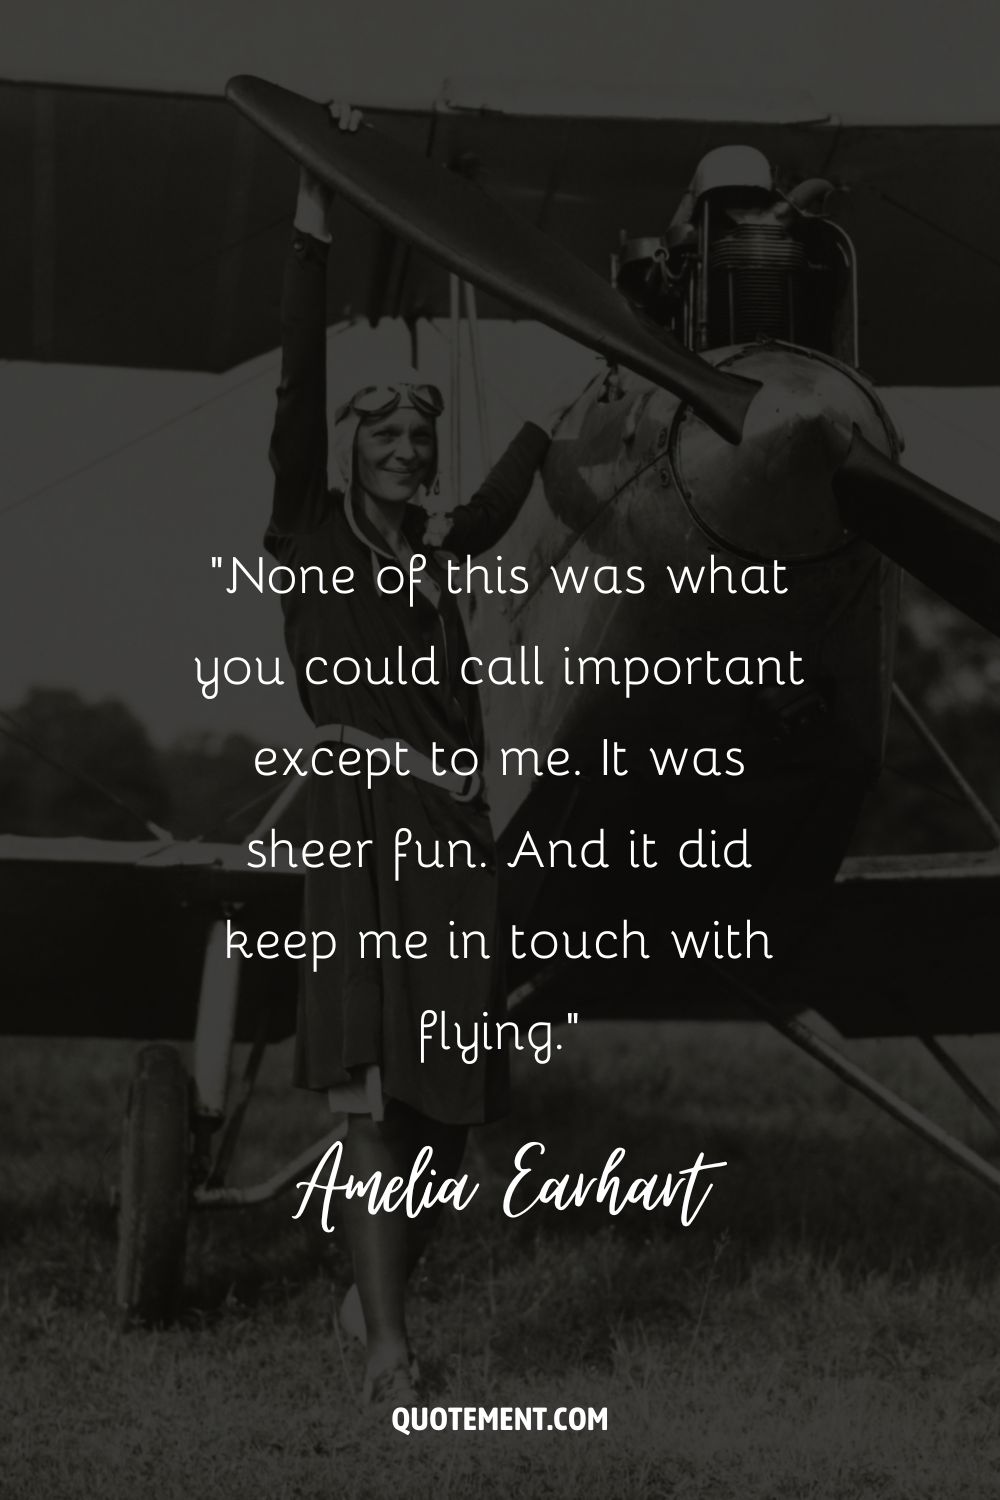 “None of this was what you could call important except to me. It was sheer fun. And it did keep me in touch with flying.” ― Amelia Earhart, The Fun of It